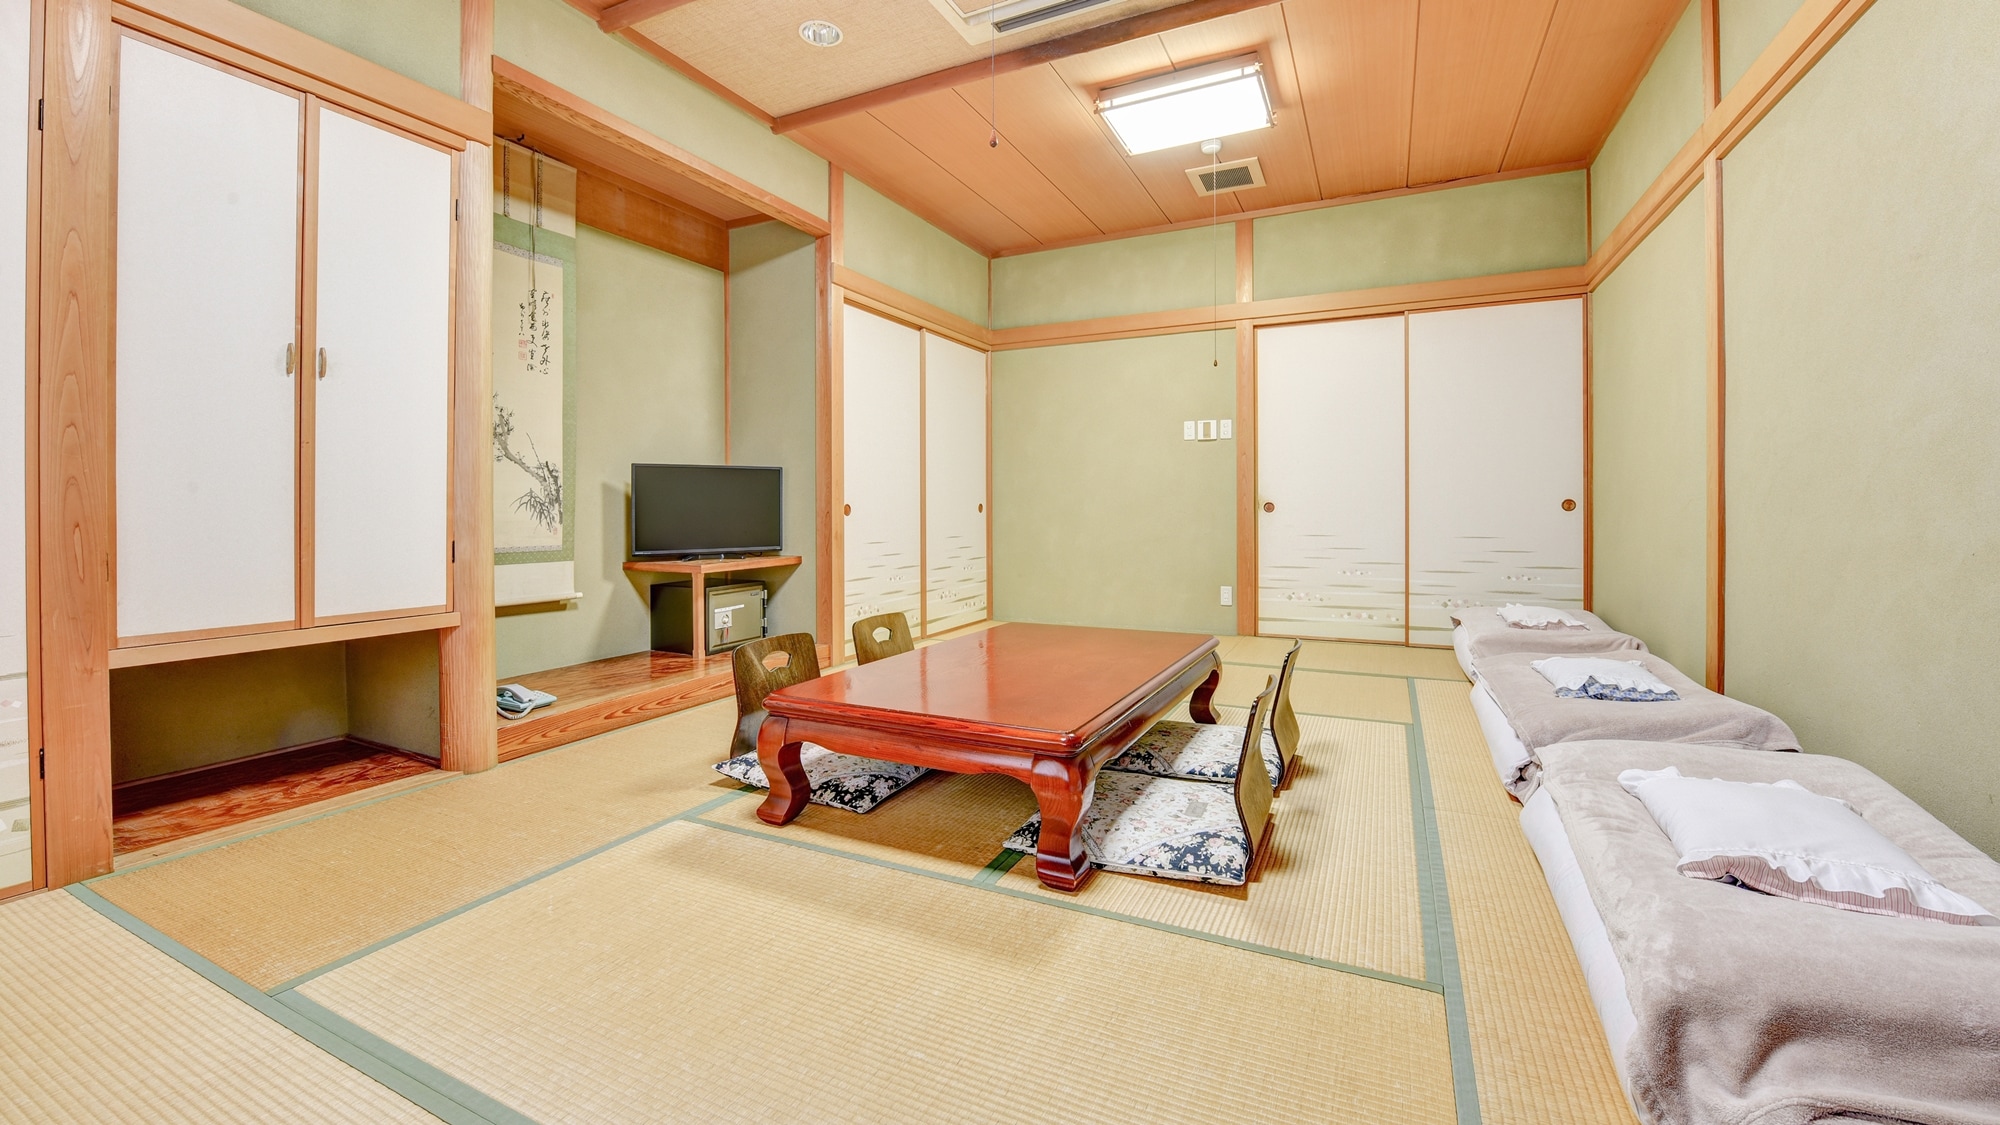 * Japanese-style room 12 tatami mats / Pure Japanese-style guest room has an elegant and calm atmosphere. Please spend a relaxing time in a family or group.